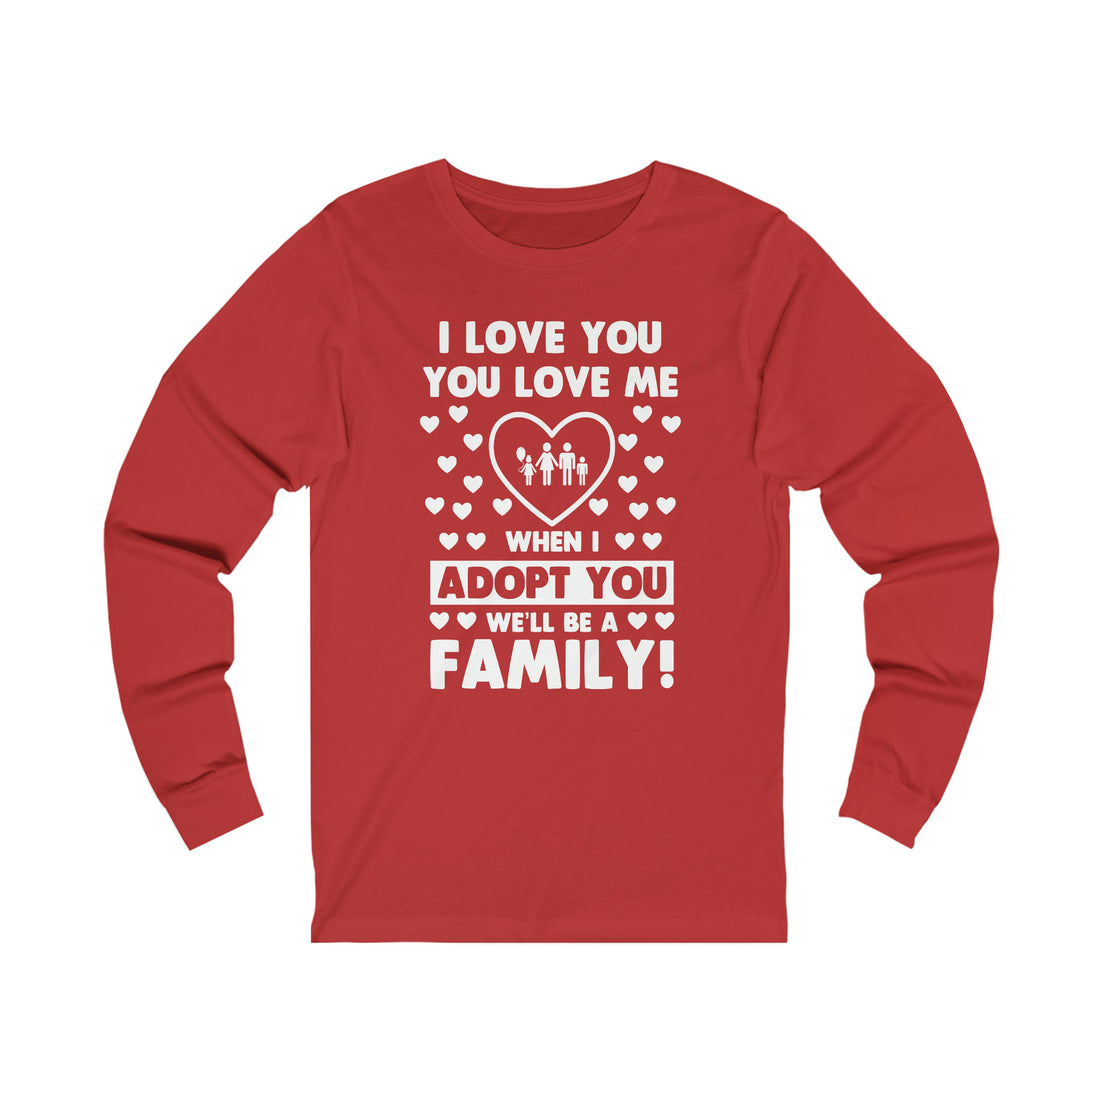 I Love You You Love Me When I Adopt You We Will Be A Family - Unisex Jersey Long Sleeve Tee